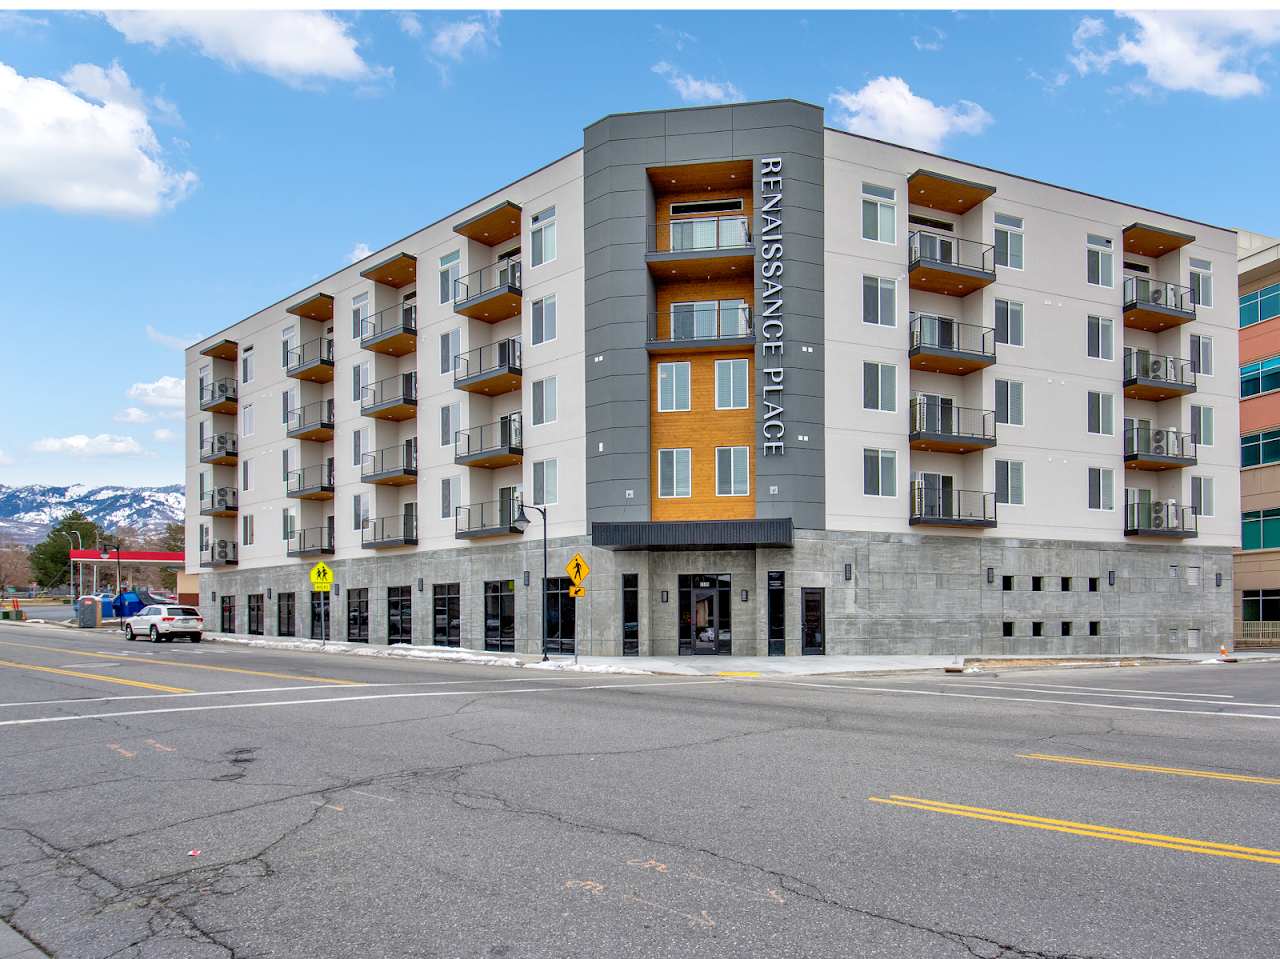 Photo of HERITAGE PLACE. Affordable housing located at 1150 SOUTH MAIN BOUNTIFUL, UT 84010